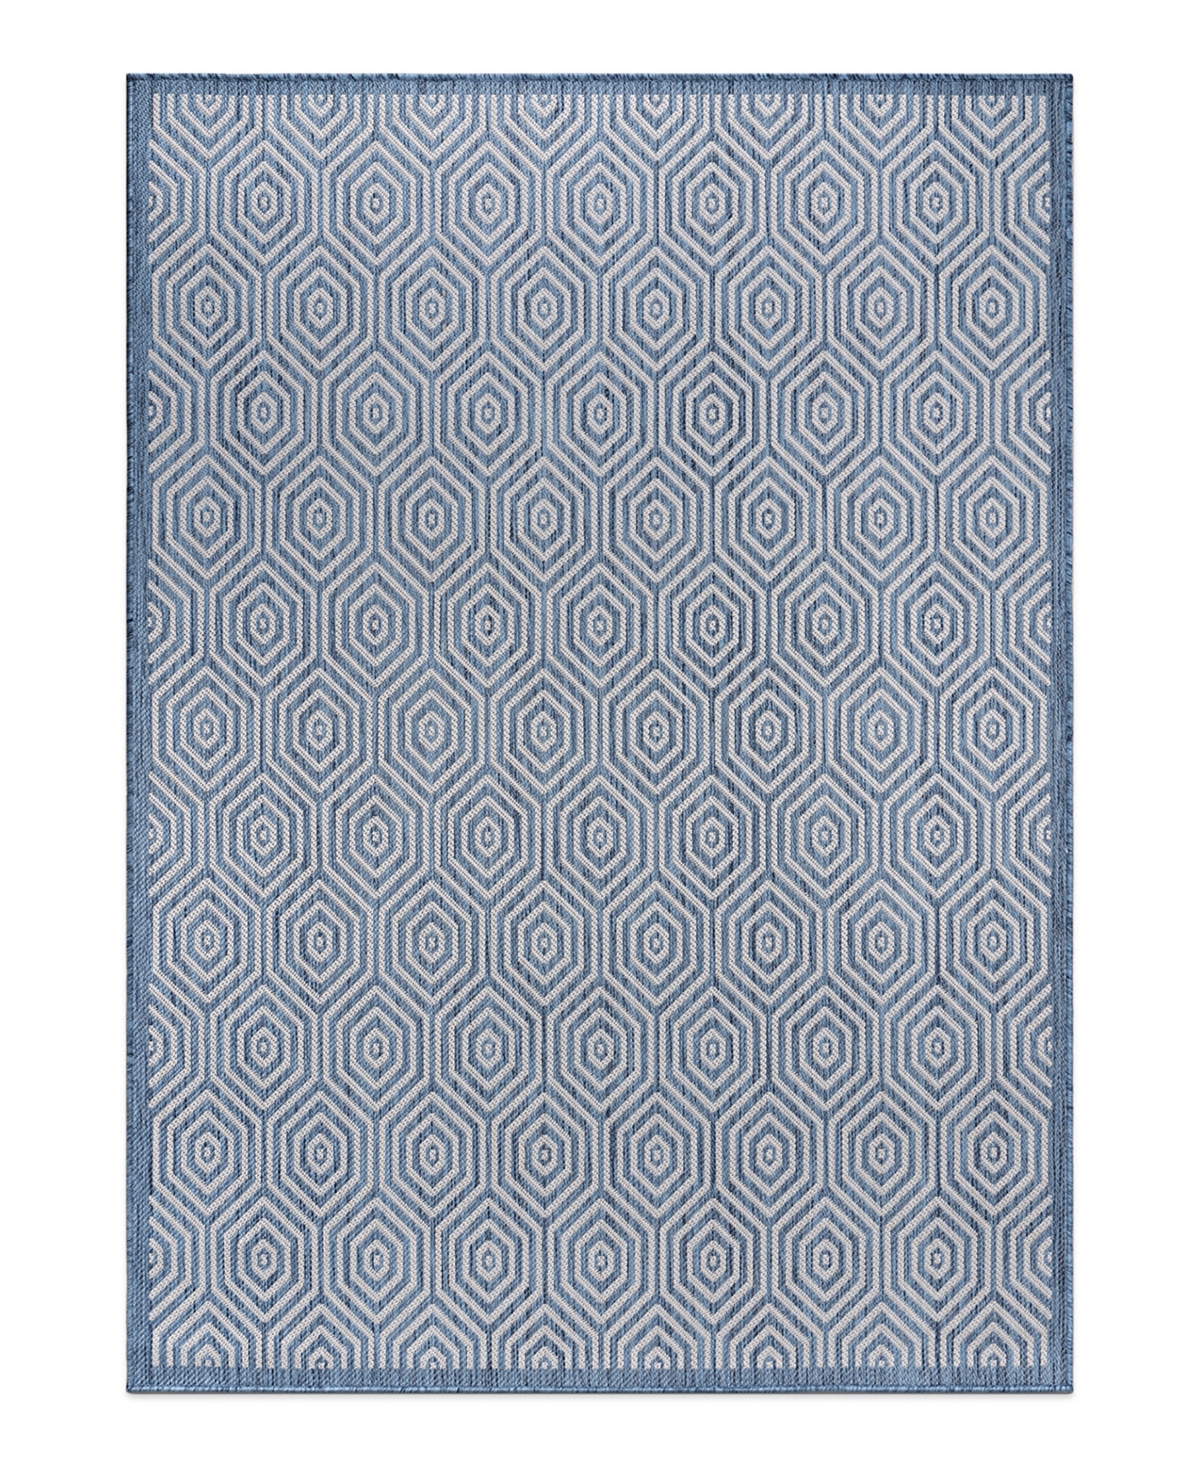 Main Street Rugs Bays Outdoor 120 7'10" X 10' Area Rug In Blue